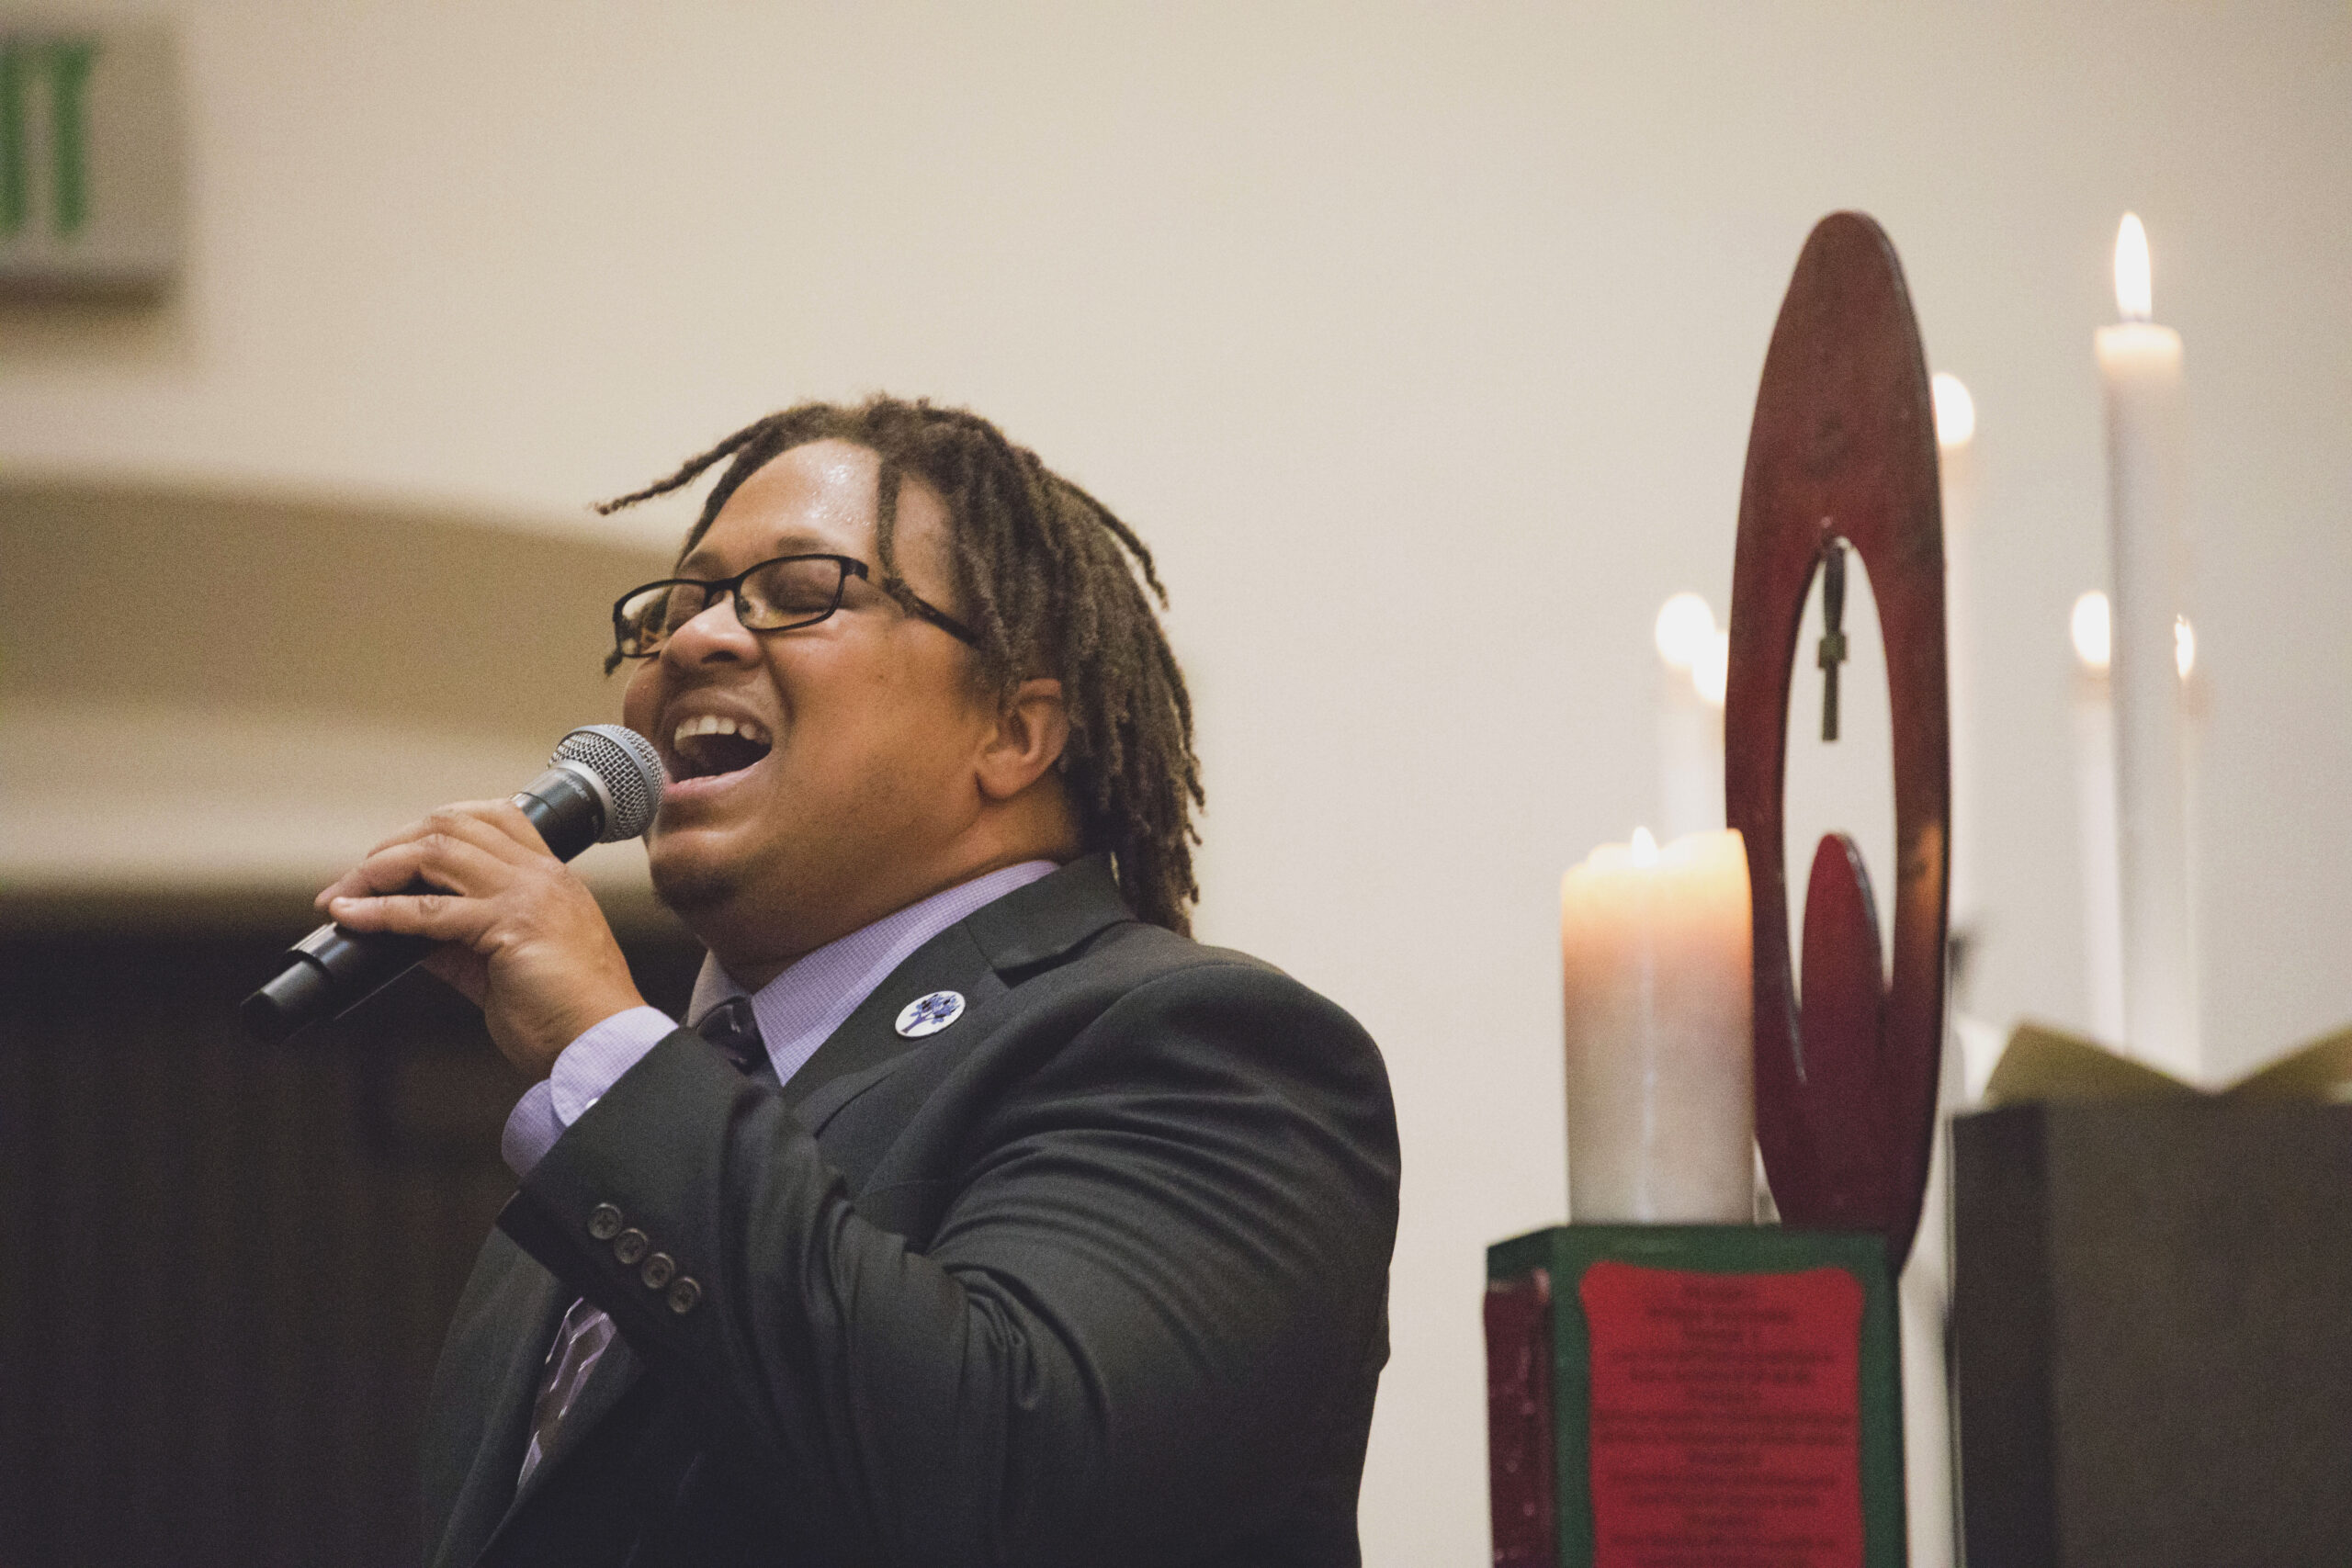 A Black man wearing a suit holds a microphone and sings. He stands in front of candles and a chalice.